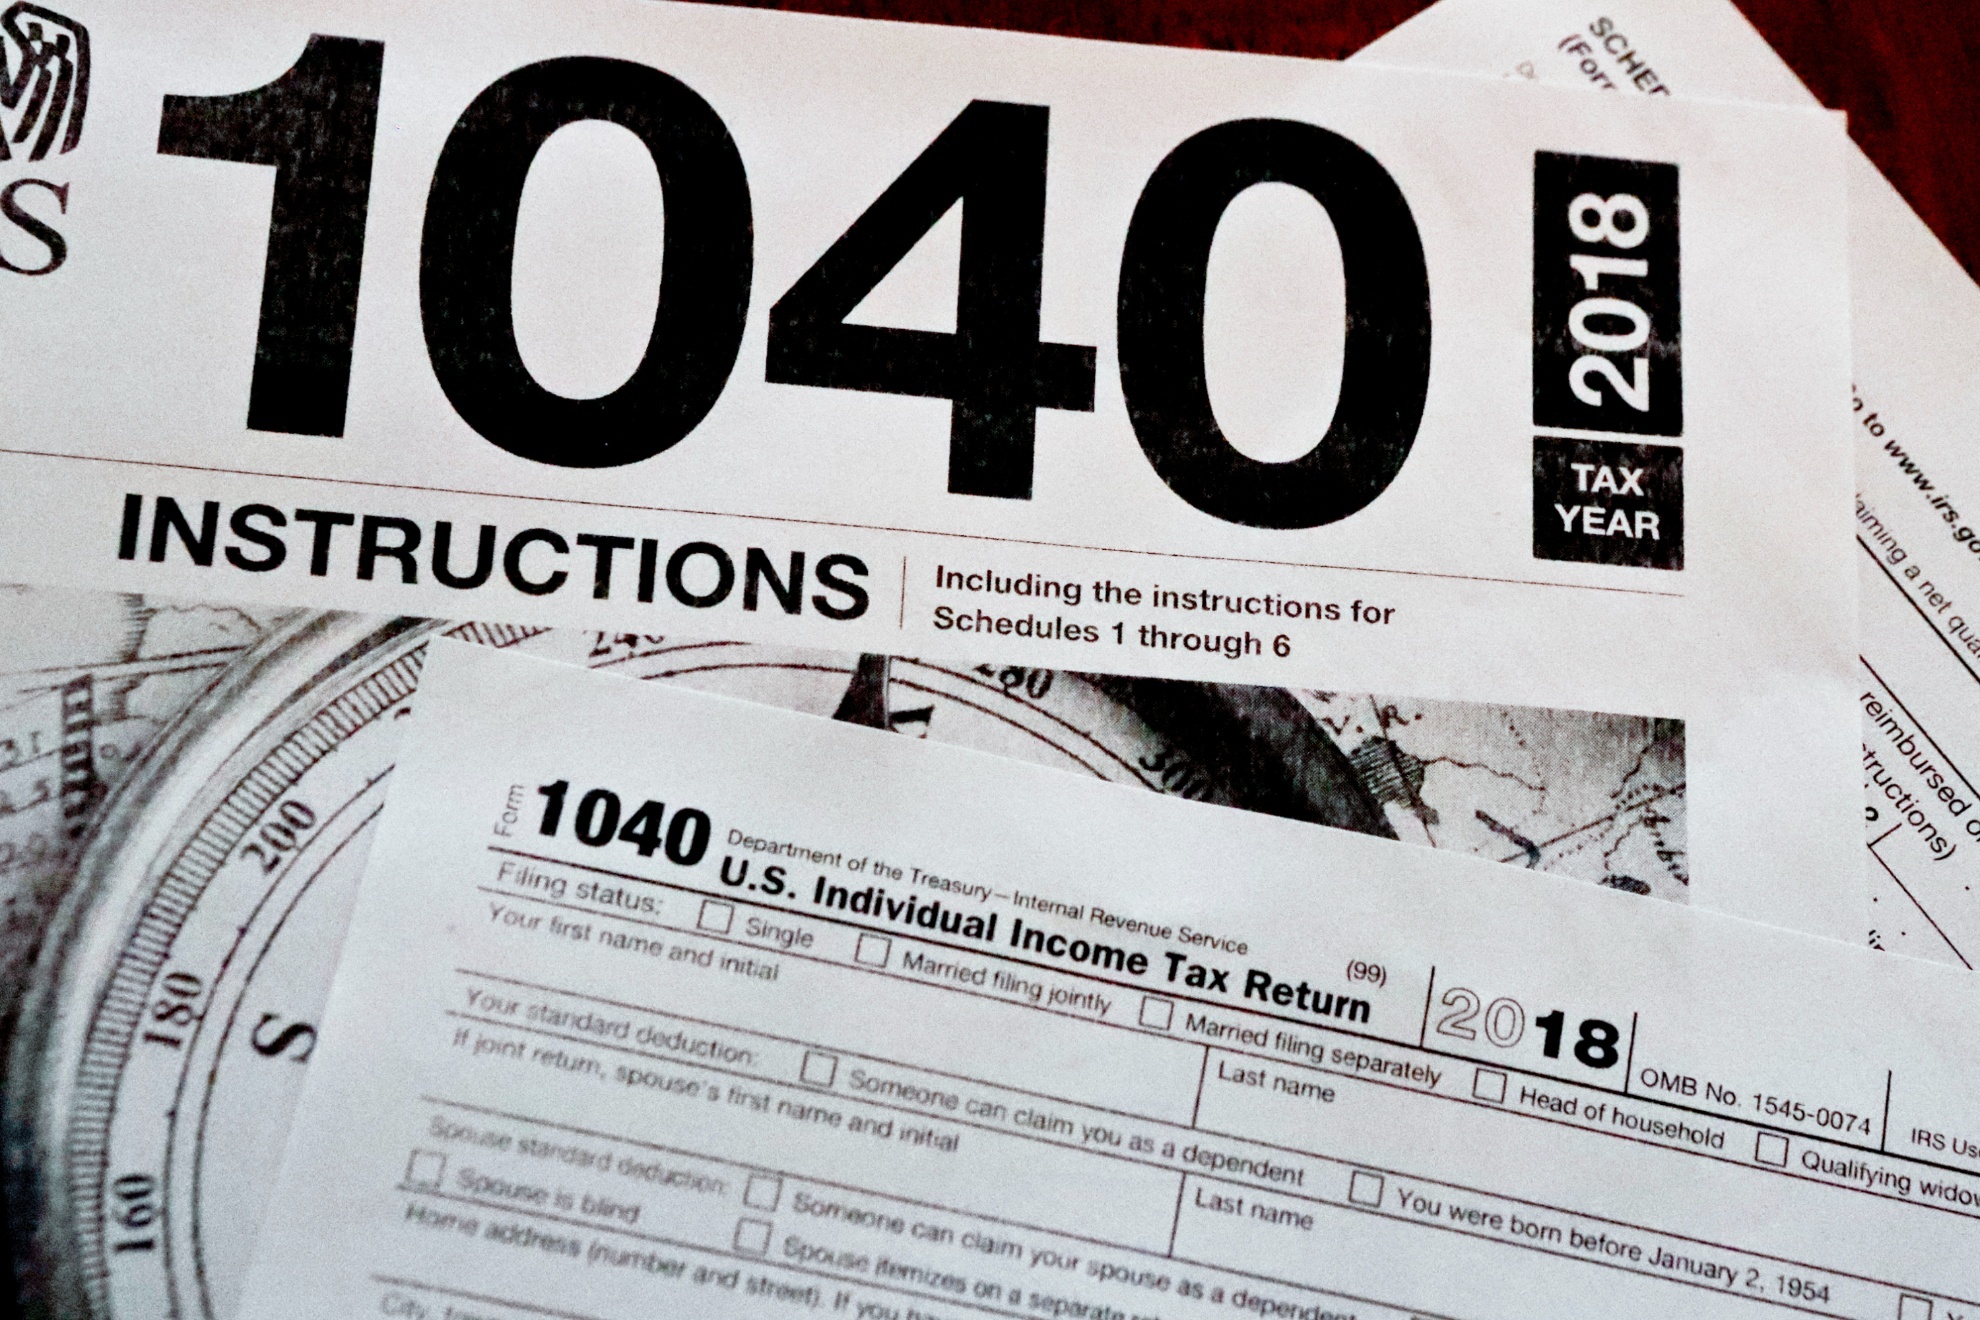 Forms printed from the IRS used for U.S. federal tax returns.